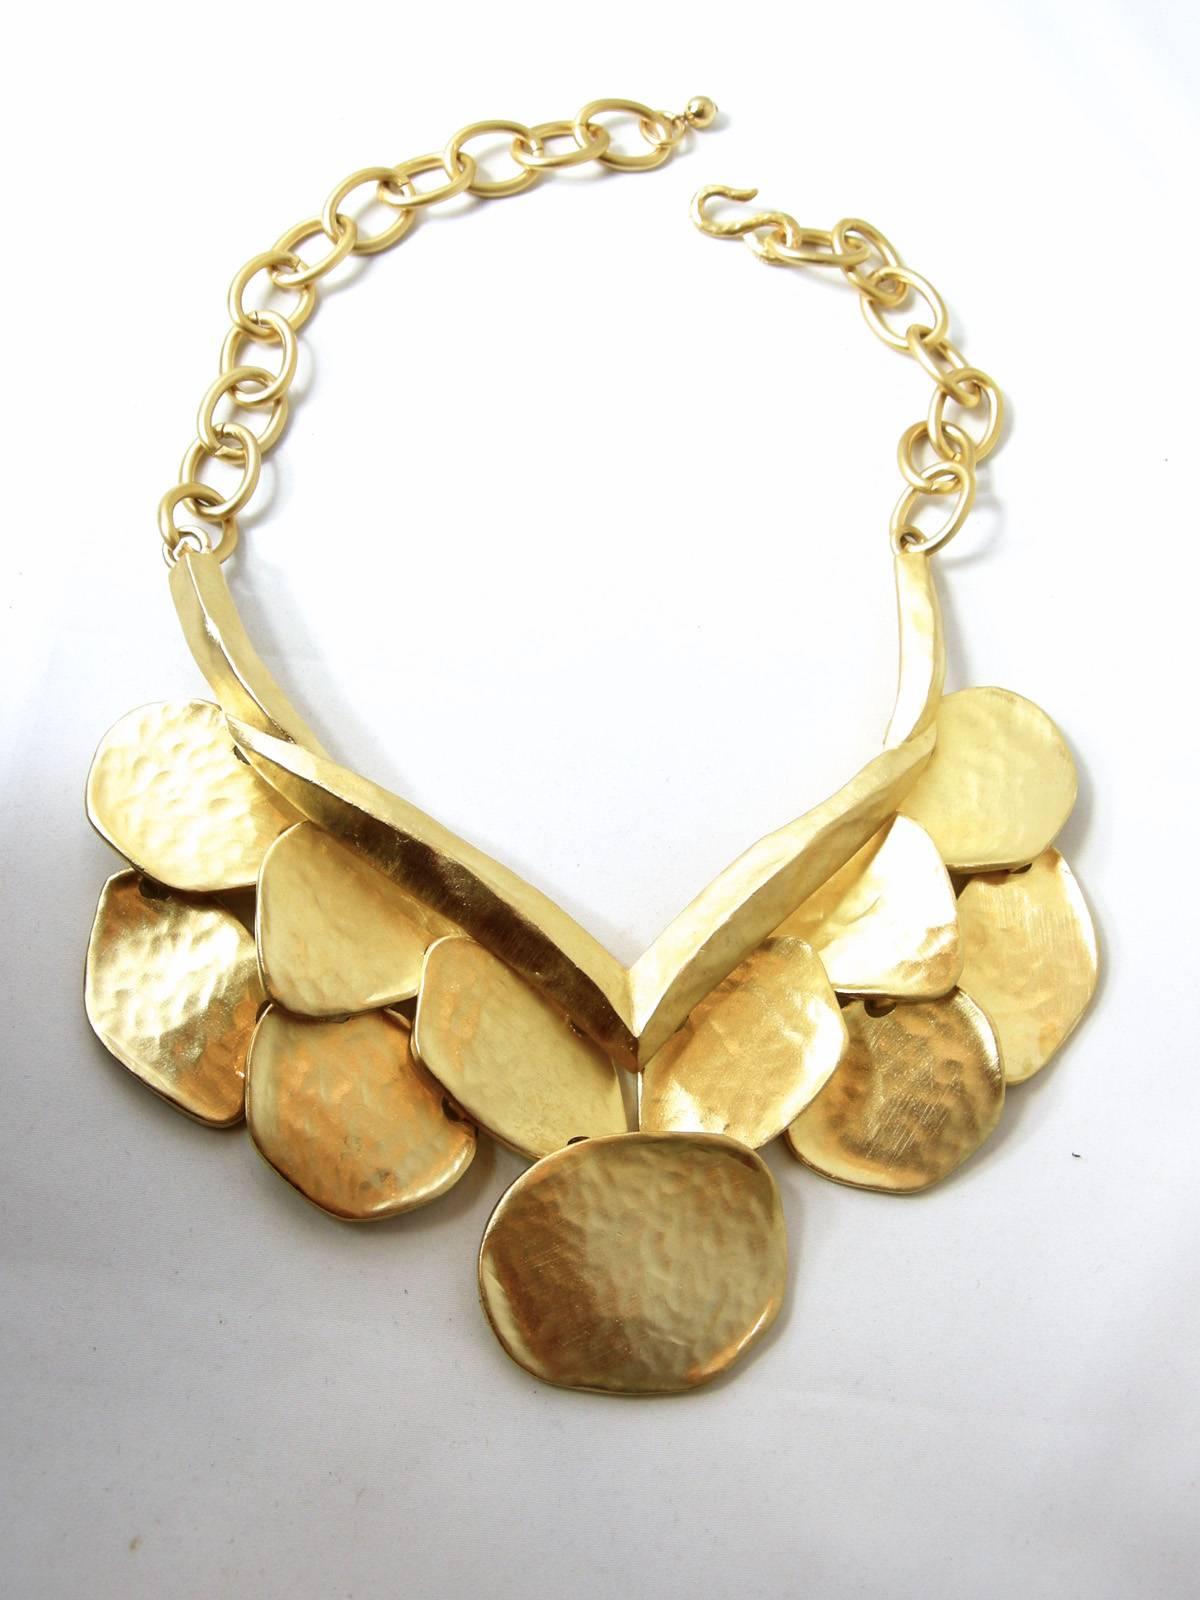 Kenneth created this golden wing bib necklace.  During the elimination trials of what he would select for his jewelry line, he eliminated this prototype, which I bought with great joy.  This superb necklace is quite rare. The golden wing is 8” long